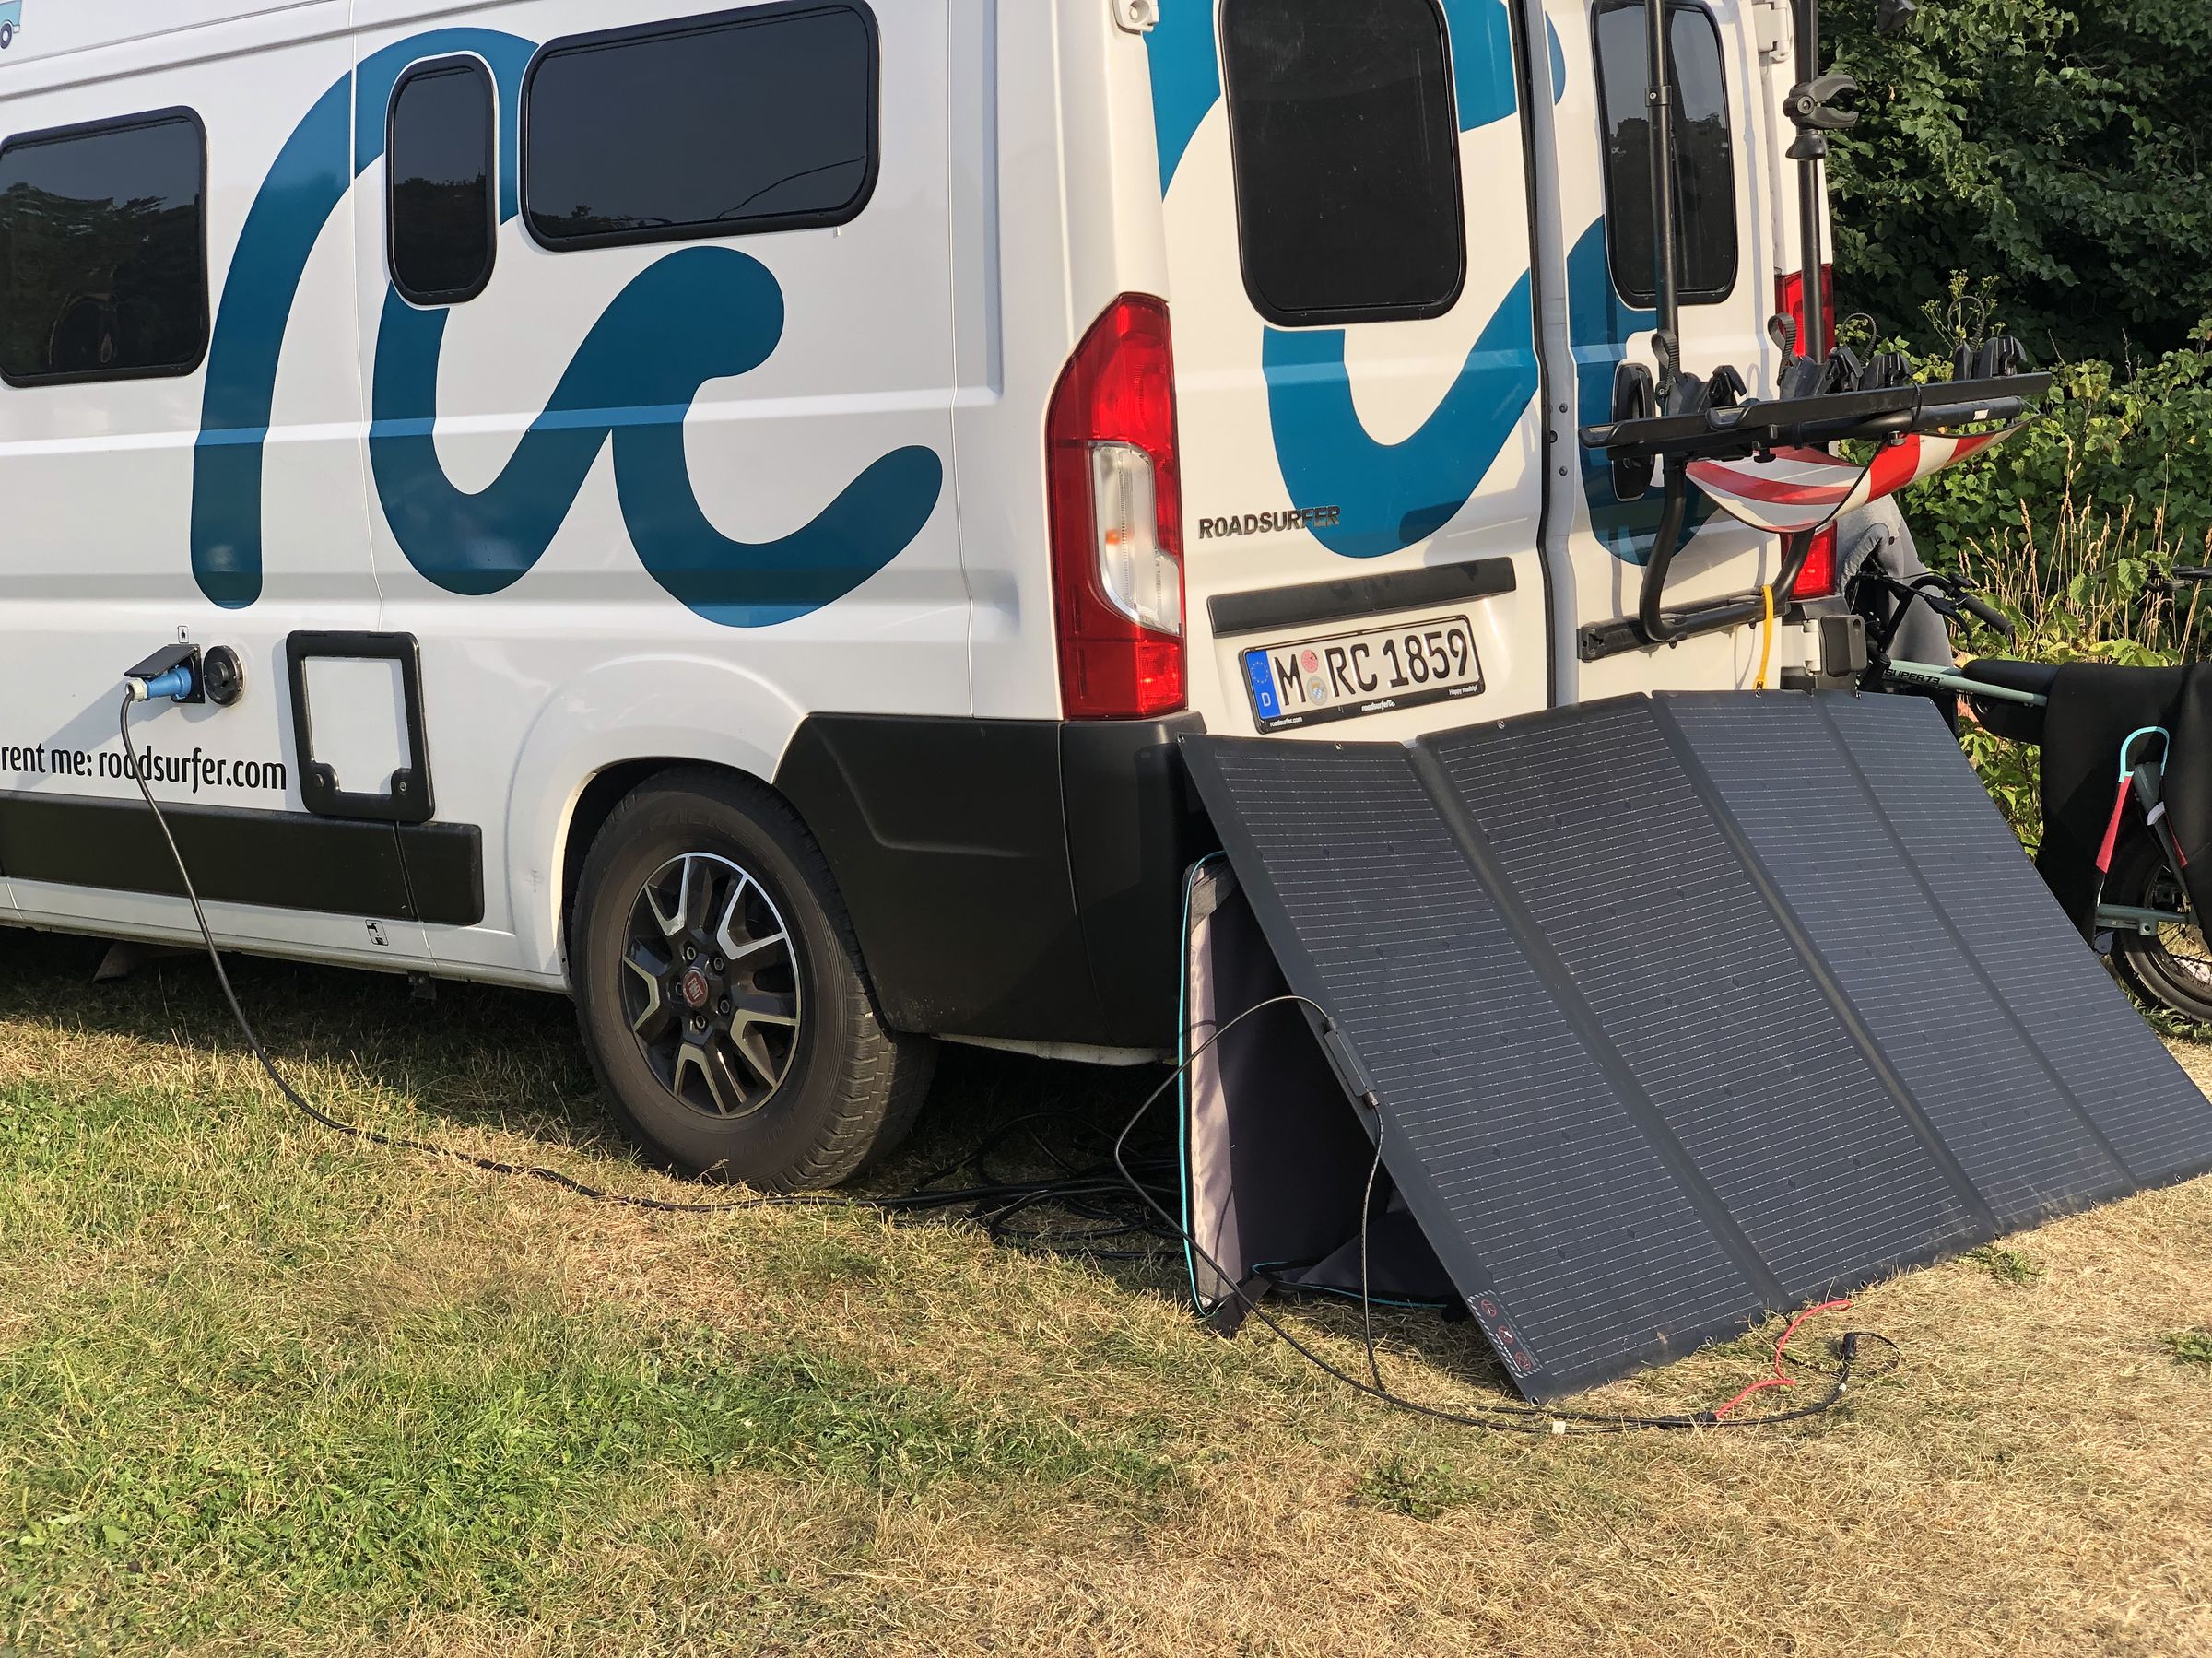 A 400W EcoFlow solar panel charges the Delta Pro (inside the van), which charges the Fiat Ducato RV.